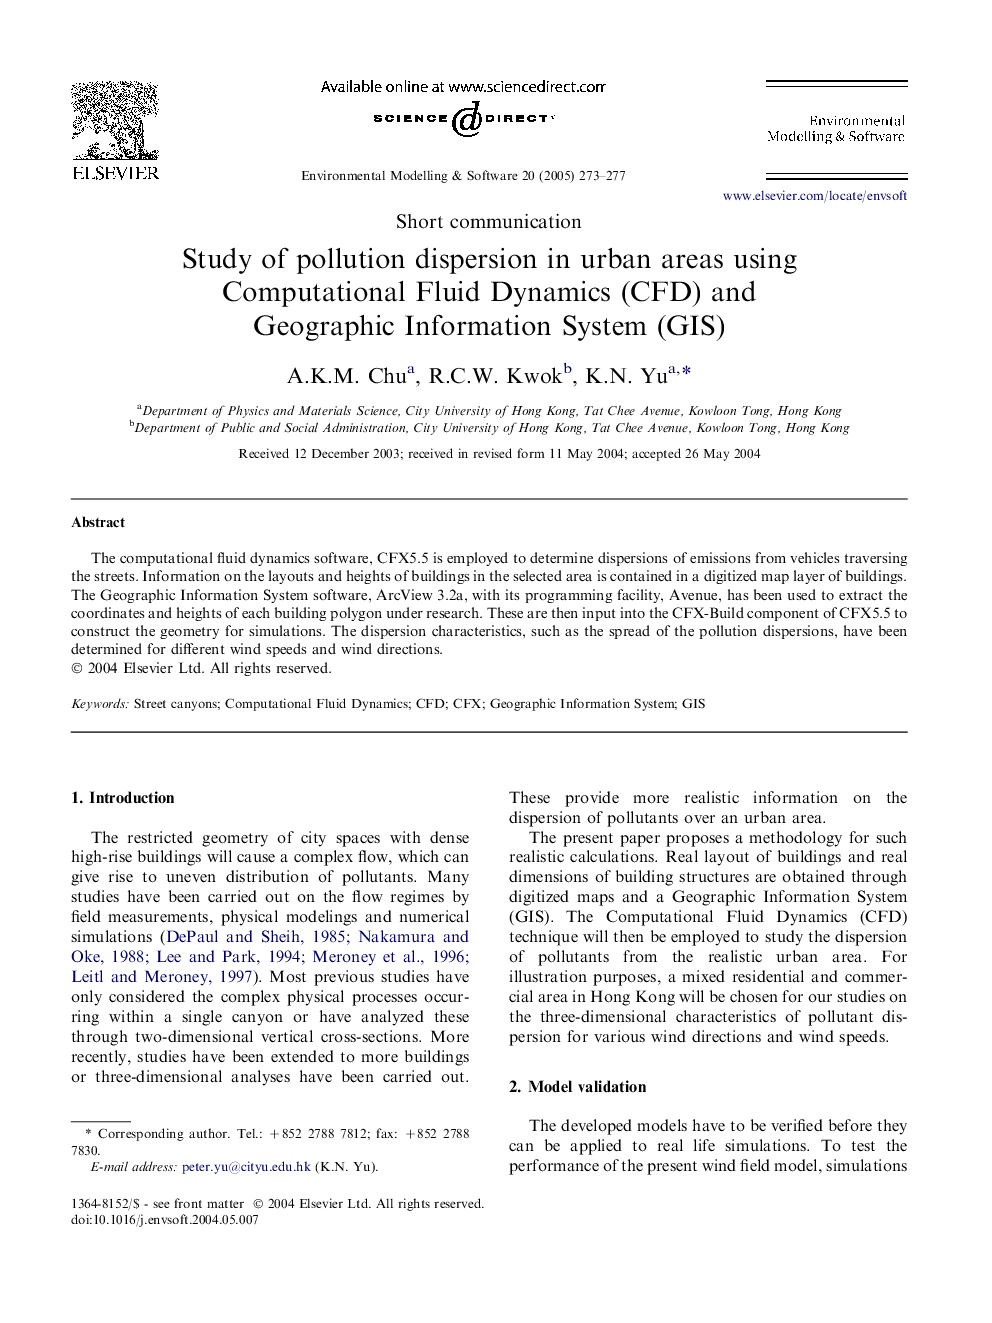 Study of pollution dispersion in urban areas using Computational Fluid Dynamics (CFD) and Geographic Information System (GIS)